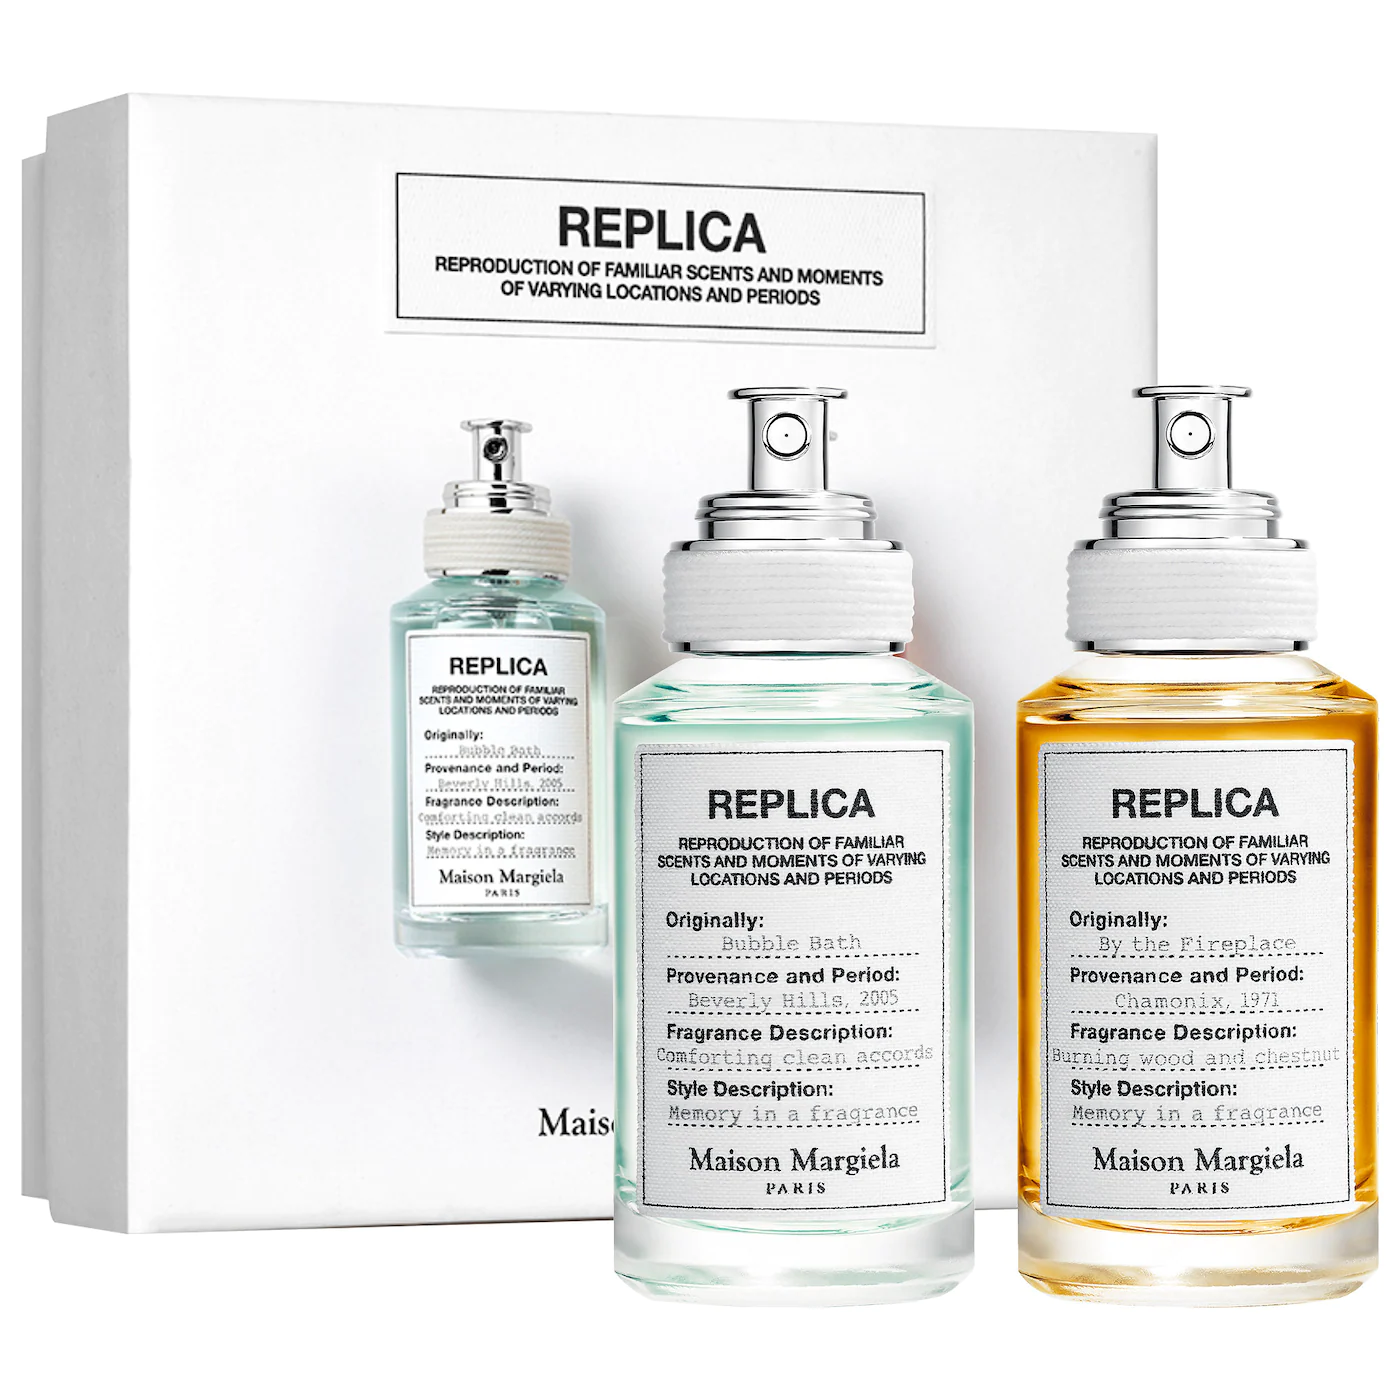 Margiela replica by the fireplace. Maison Margiela Replica Bubble Bath. Maison Margiela Replica by the Fireplace 30мл. Replica Maison Margiela Bubble Bath 100мл. Maison Martin Margiela Replica by the Fireplace EDT (30 мл).